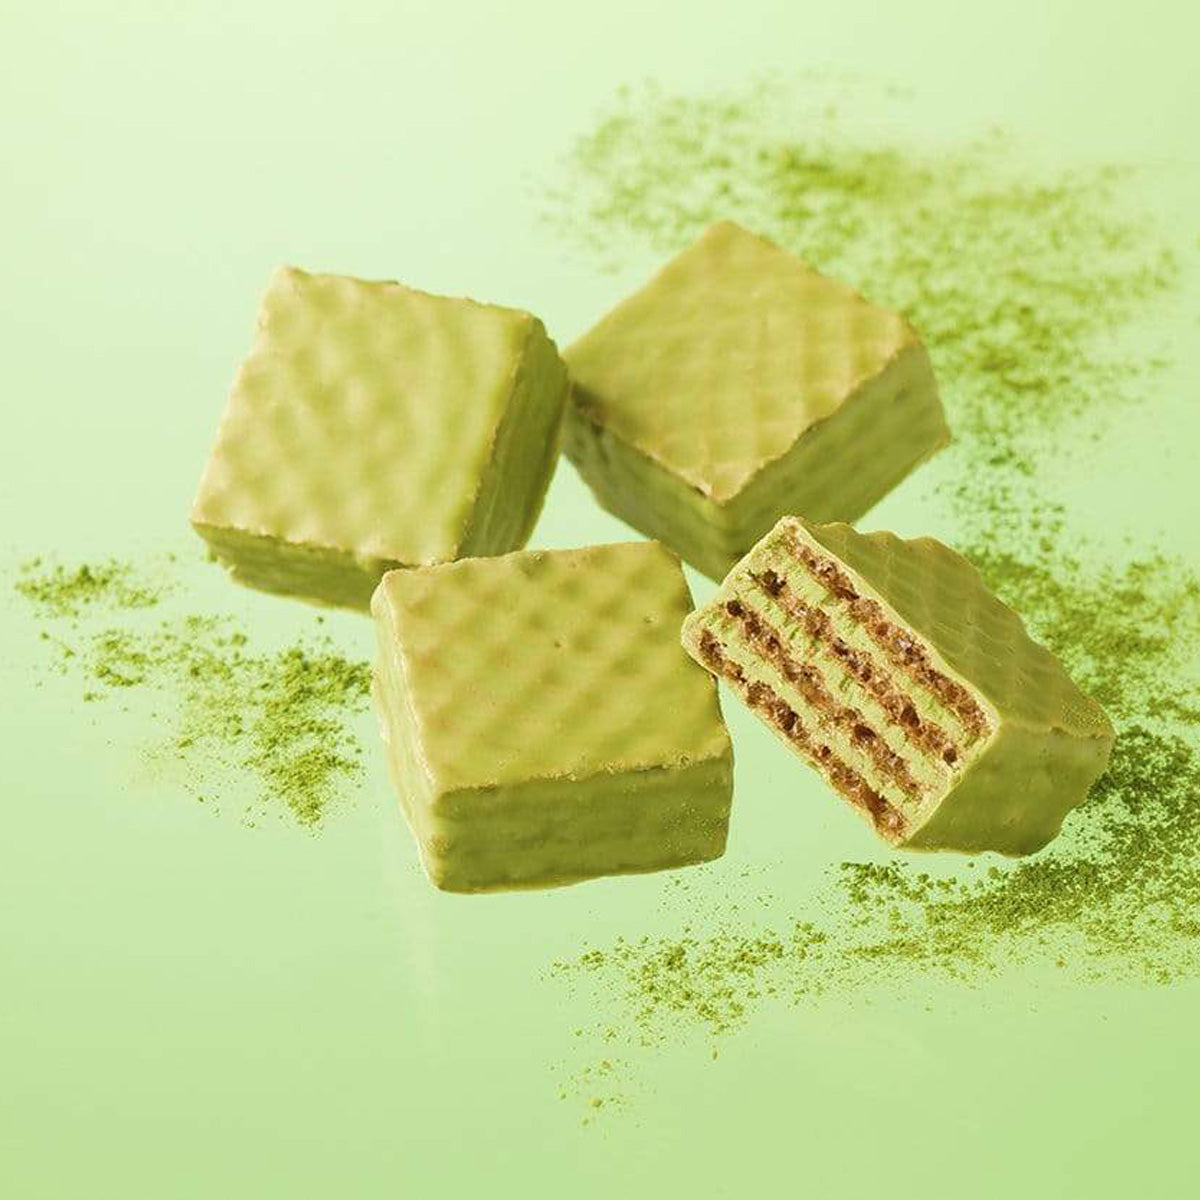 ROYCE' Chocolate - Chocolate Wafers "Matcha" - Image shows green chocolate wafers with a crisscross texture. Background is in green and has sprinkles of green tea powder.